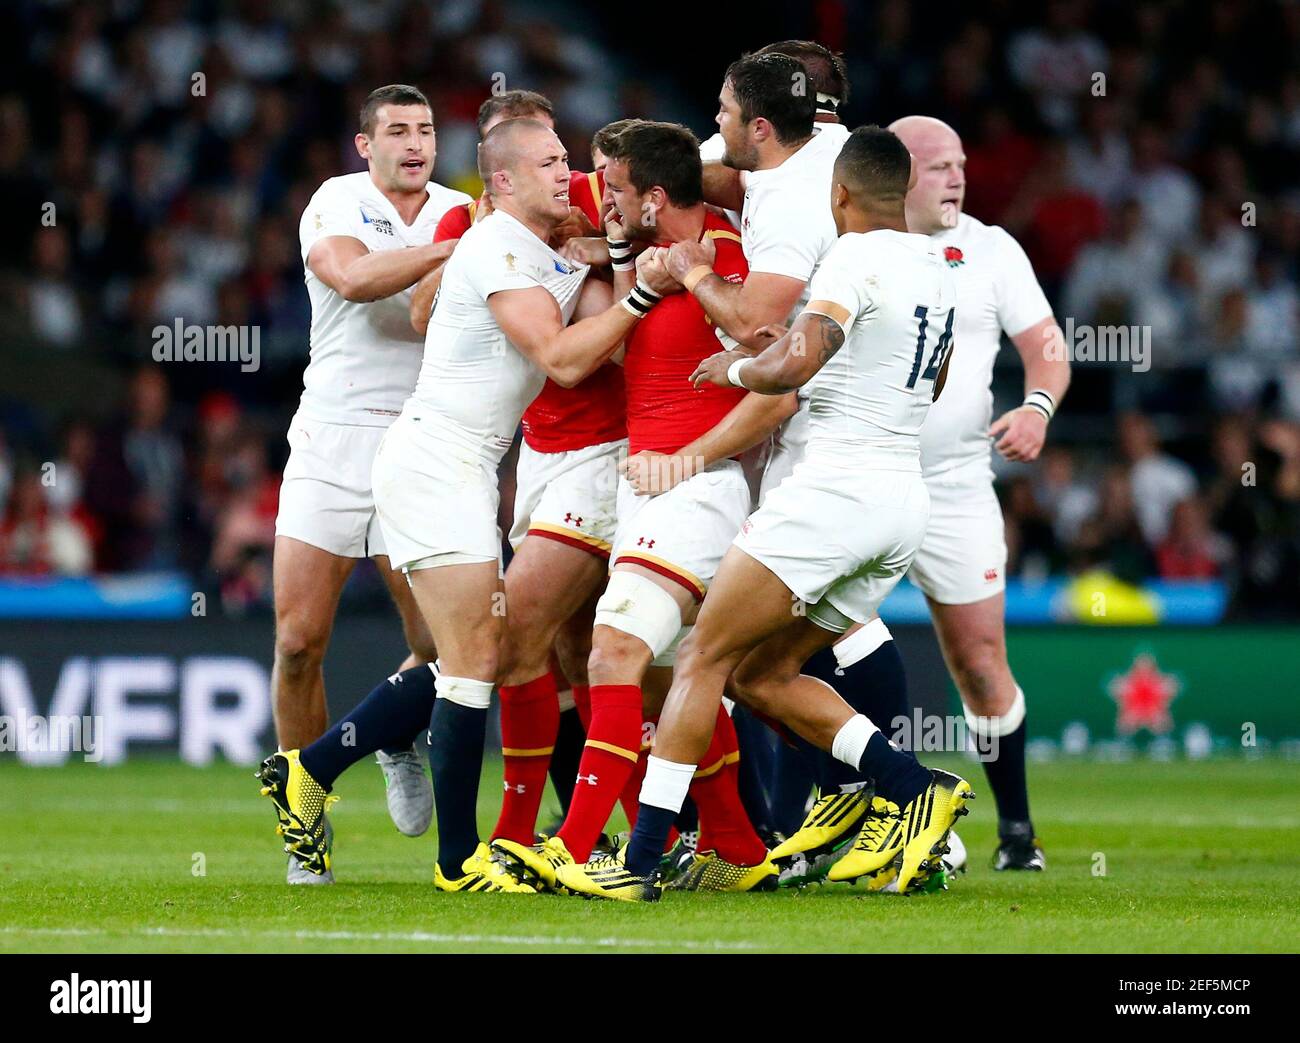 Rugby Union - England v Wales - IRB Rugby World Cup 2015 Pool A - Twickenham Stadium, London, England - 26/9/15  Mike Brown of England and Sam Warburton of Wales clash  Reuters / Andrew Winning  Livepic Stock Photo